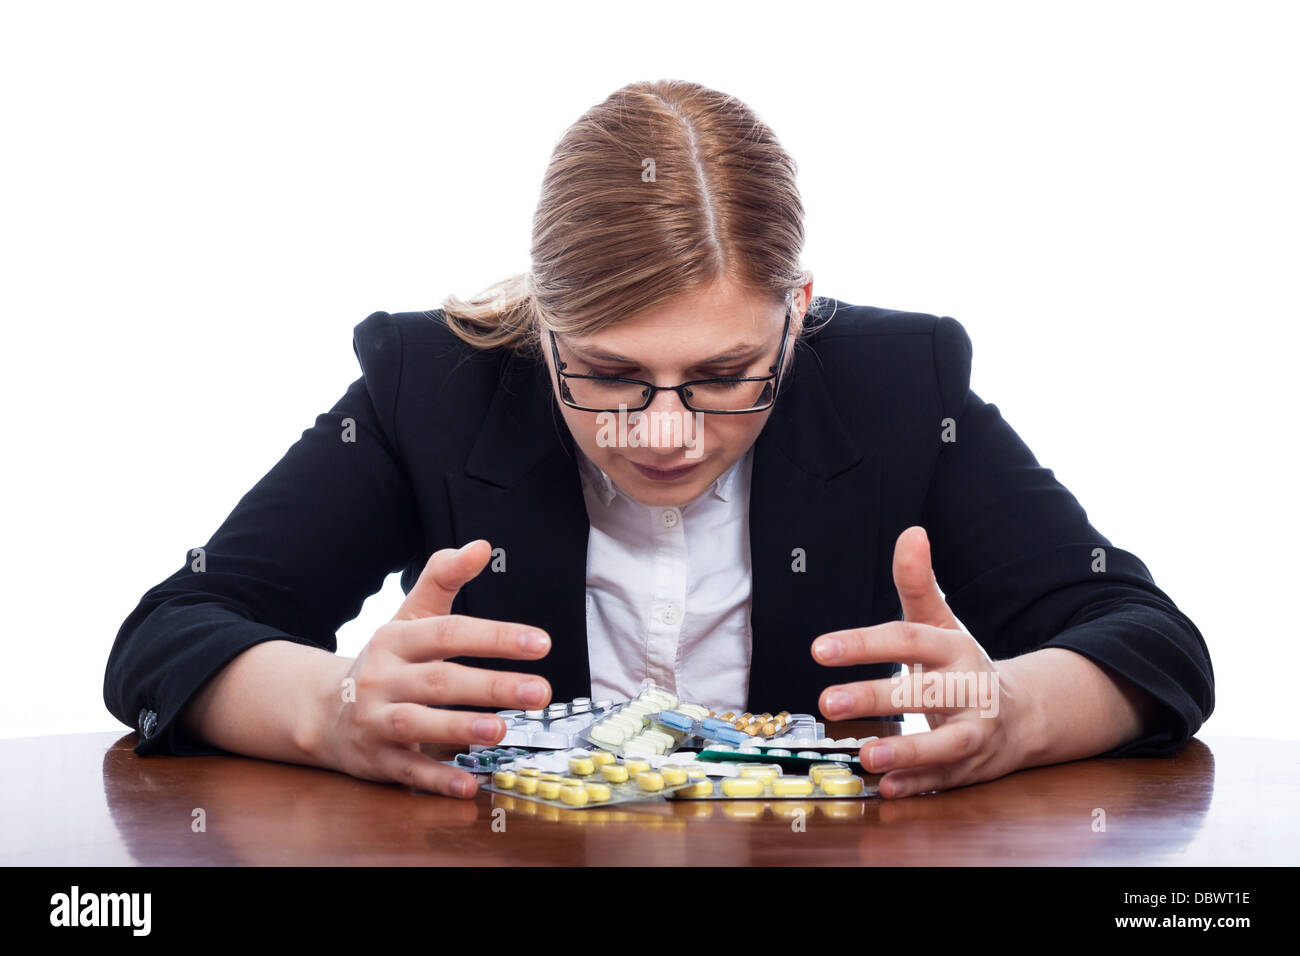 Business woman with many pills, isolated on white background. Stock Photo